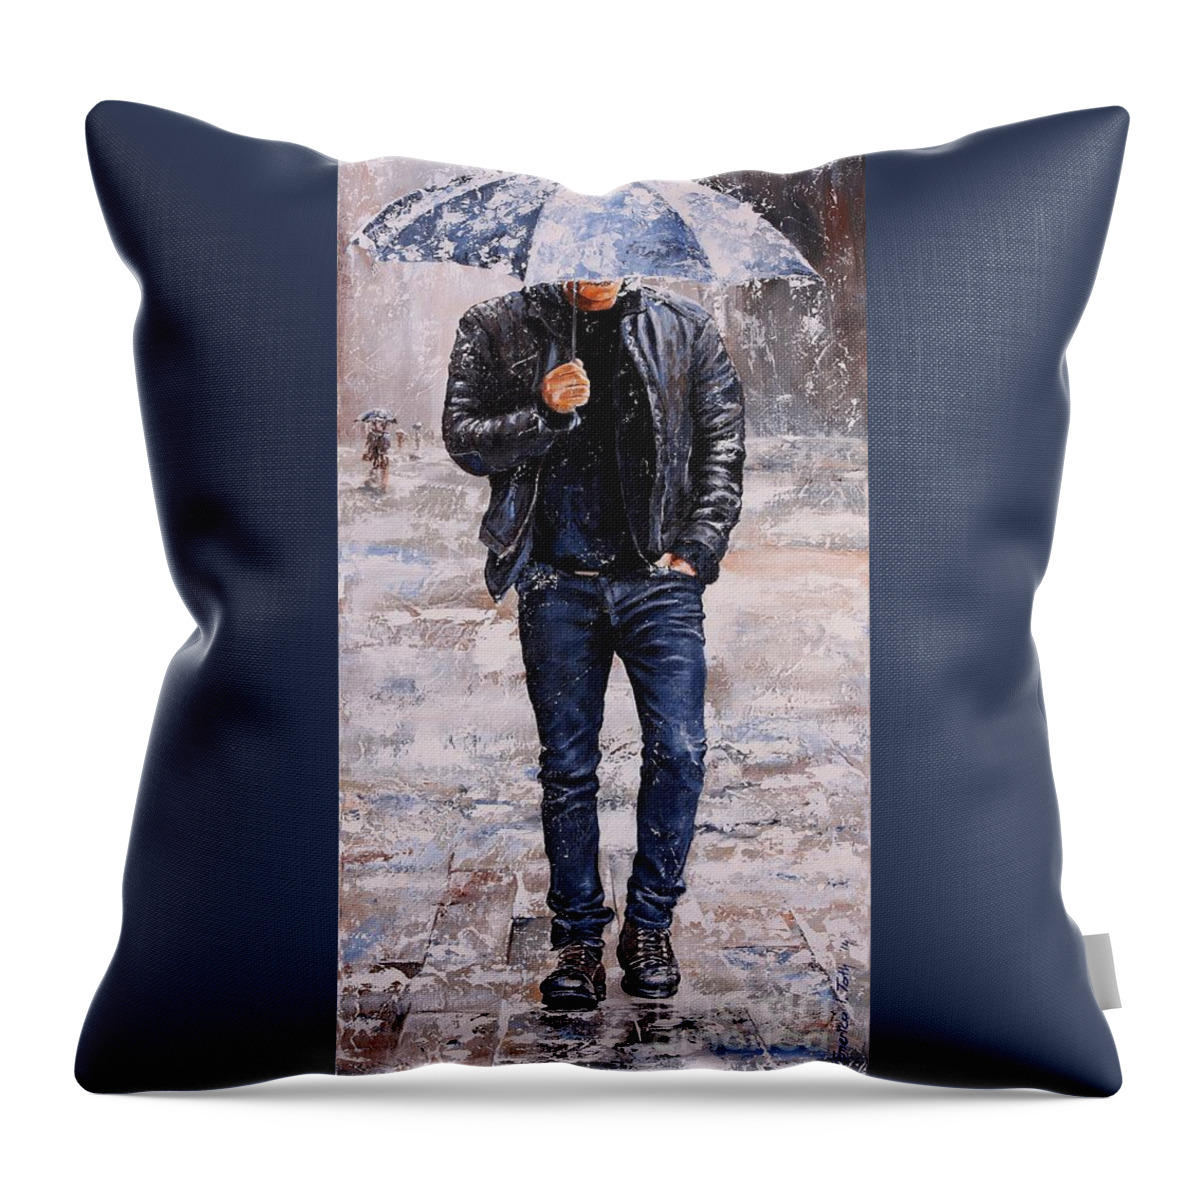 Rain Throw Pillow featuring the painting Rainy Day #23 by Emerico Imre Toth